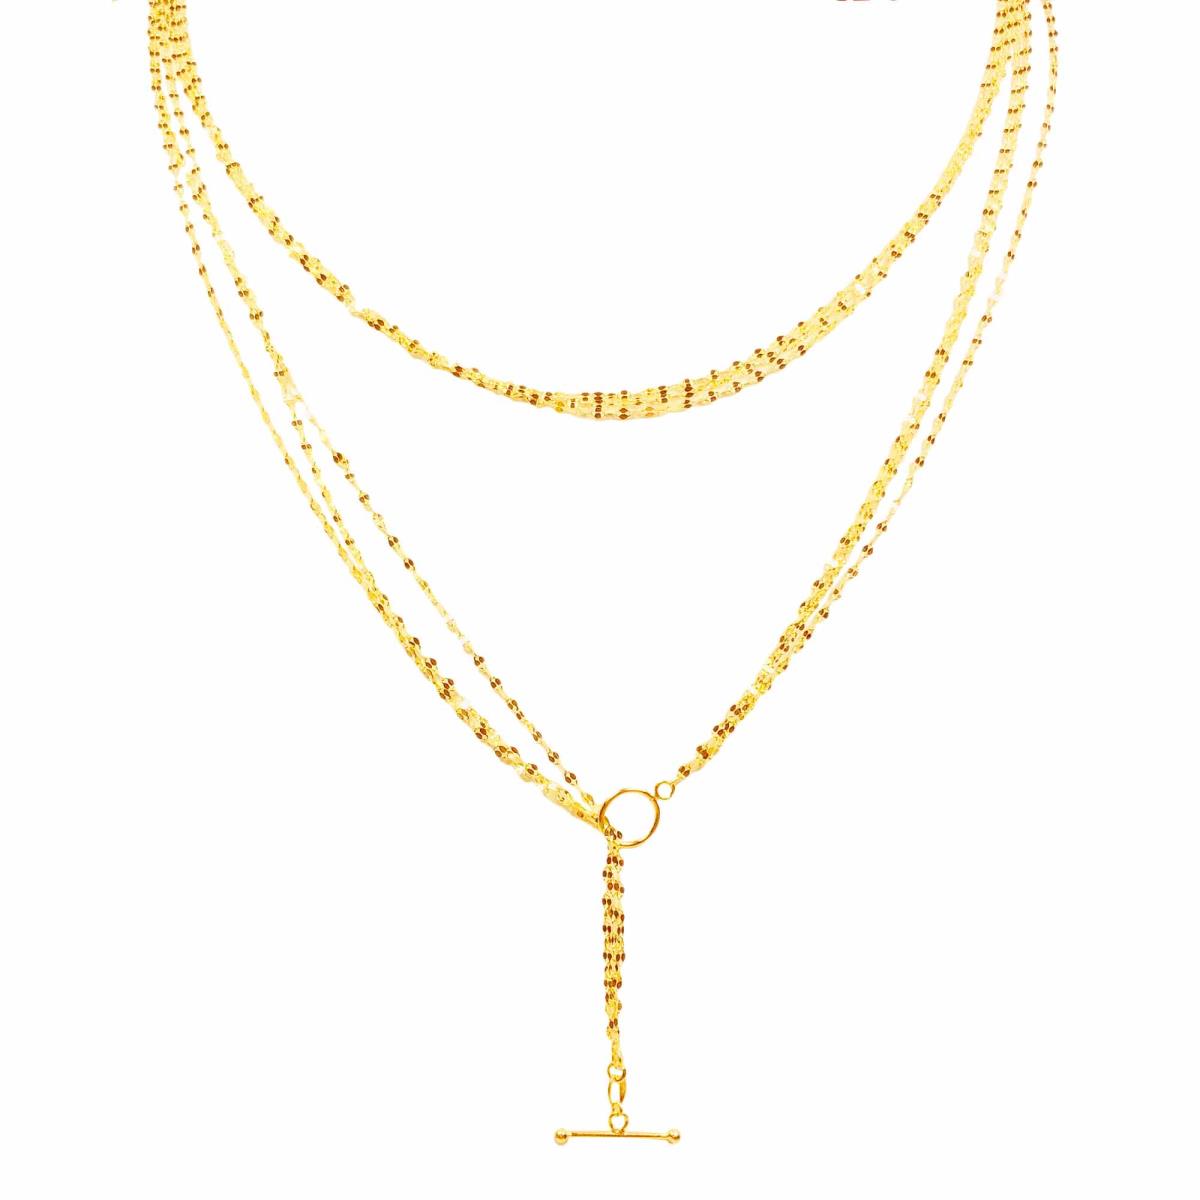 14K Yellow Gold DC Twist Multi Layer 36" Necklace